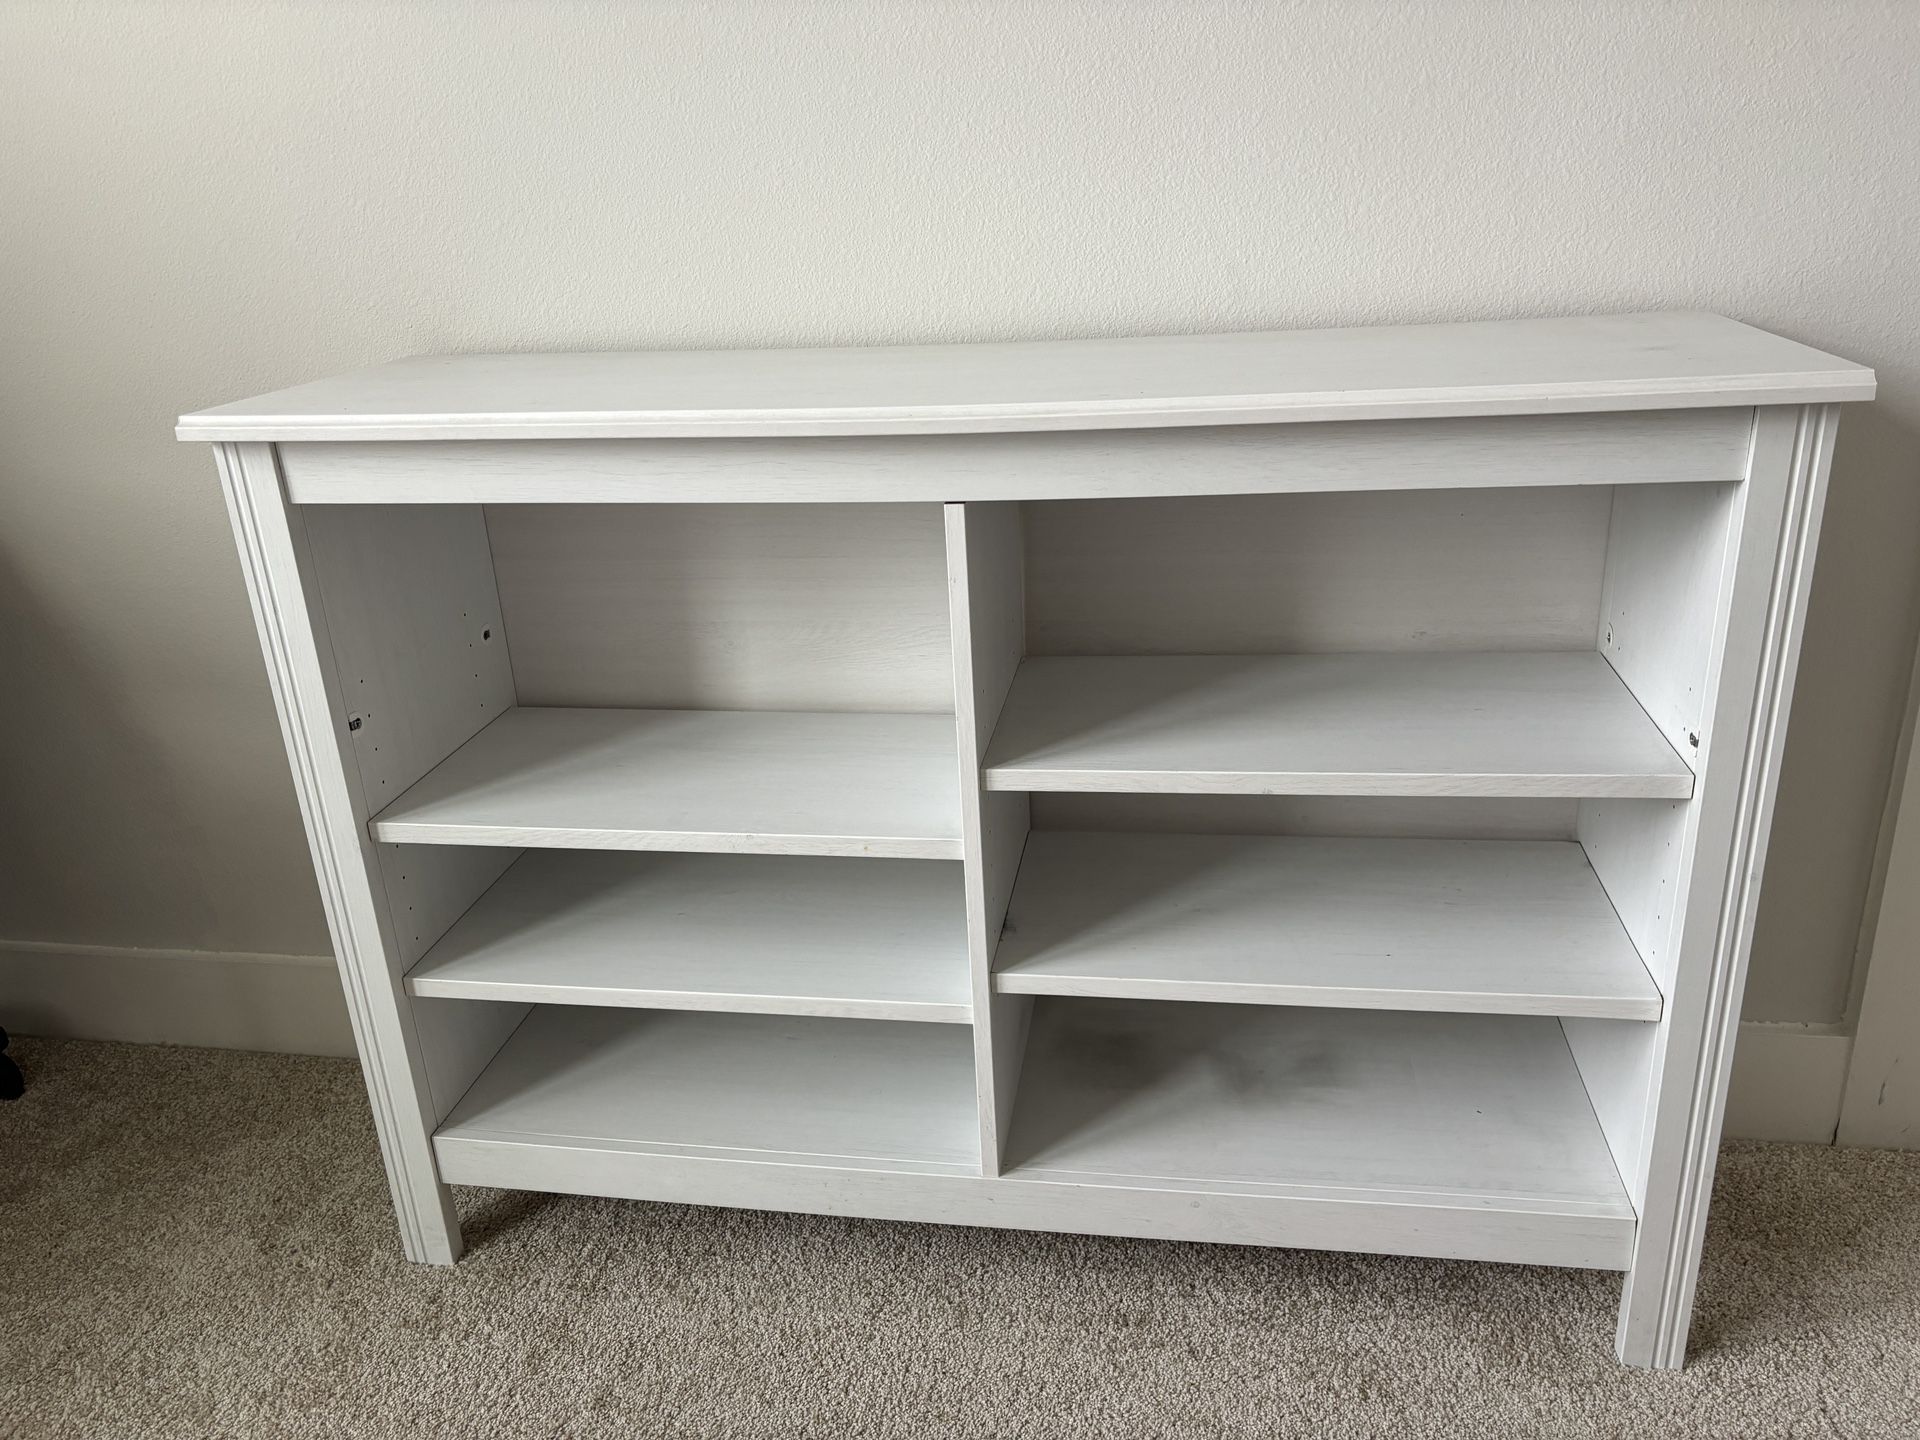 Tv stand With Adjustable Shelves 